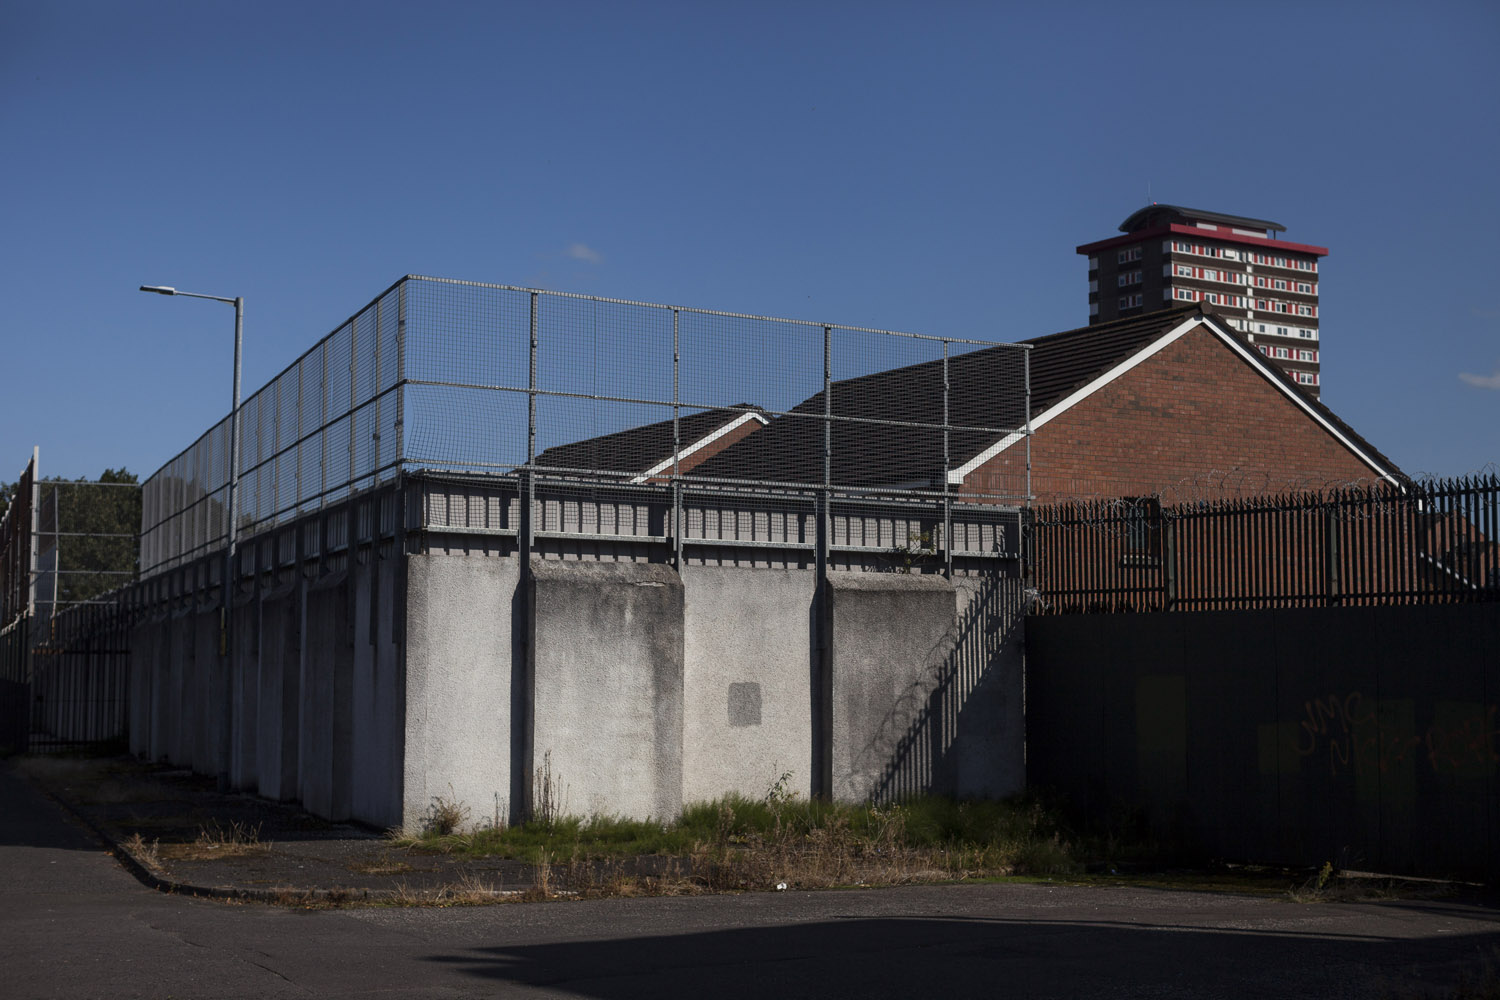 A “Peace Line” divides a Protestant area from a Catholic one in West Belfast. The points of contact between the two communities are known as “interfaces”, and are often the site of frictions and violence. Tall separation barriers known as Peace Lines mark some of these interfaces, with gates at the main connecting roads that are closed from sunset to dawn and are often operated by the local residents themselves.